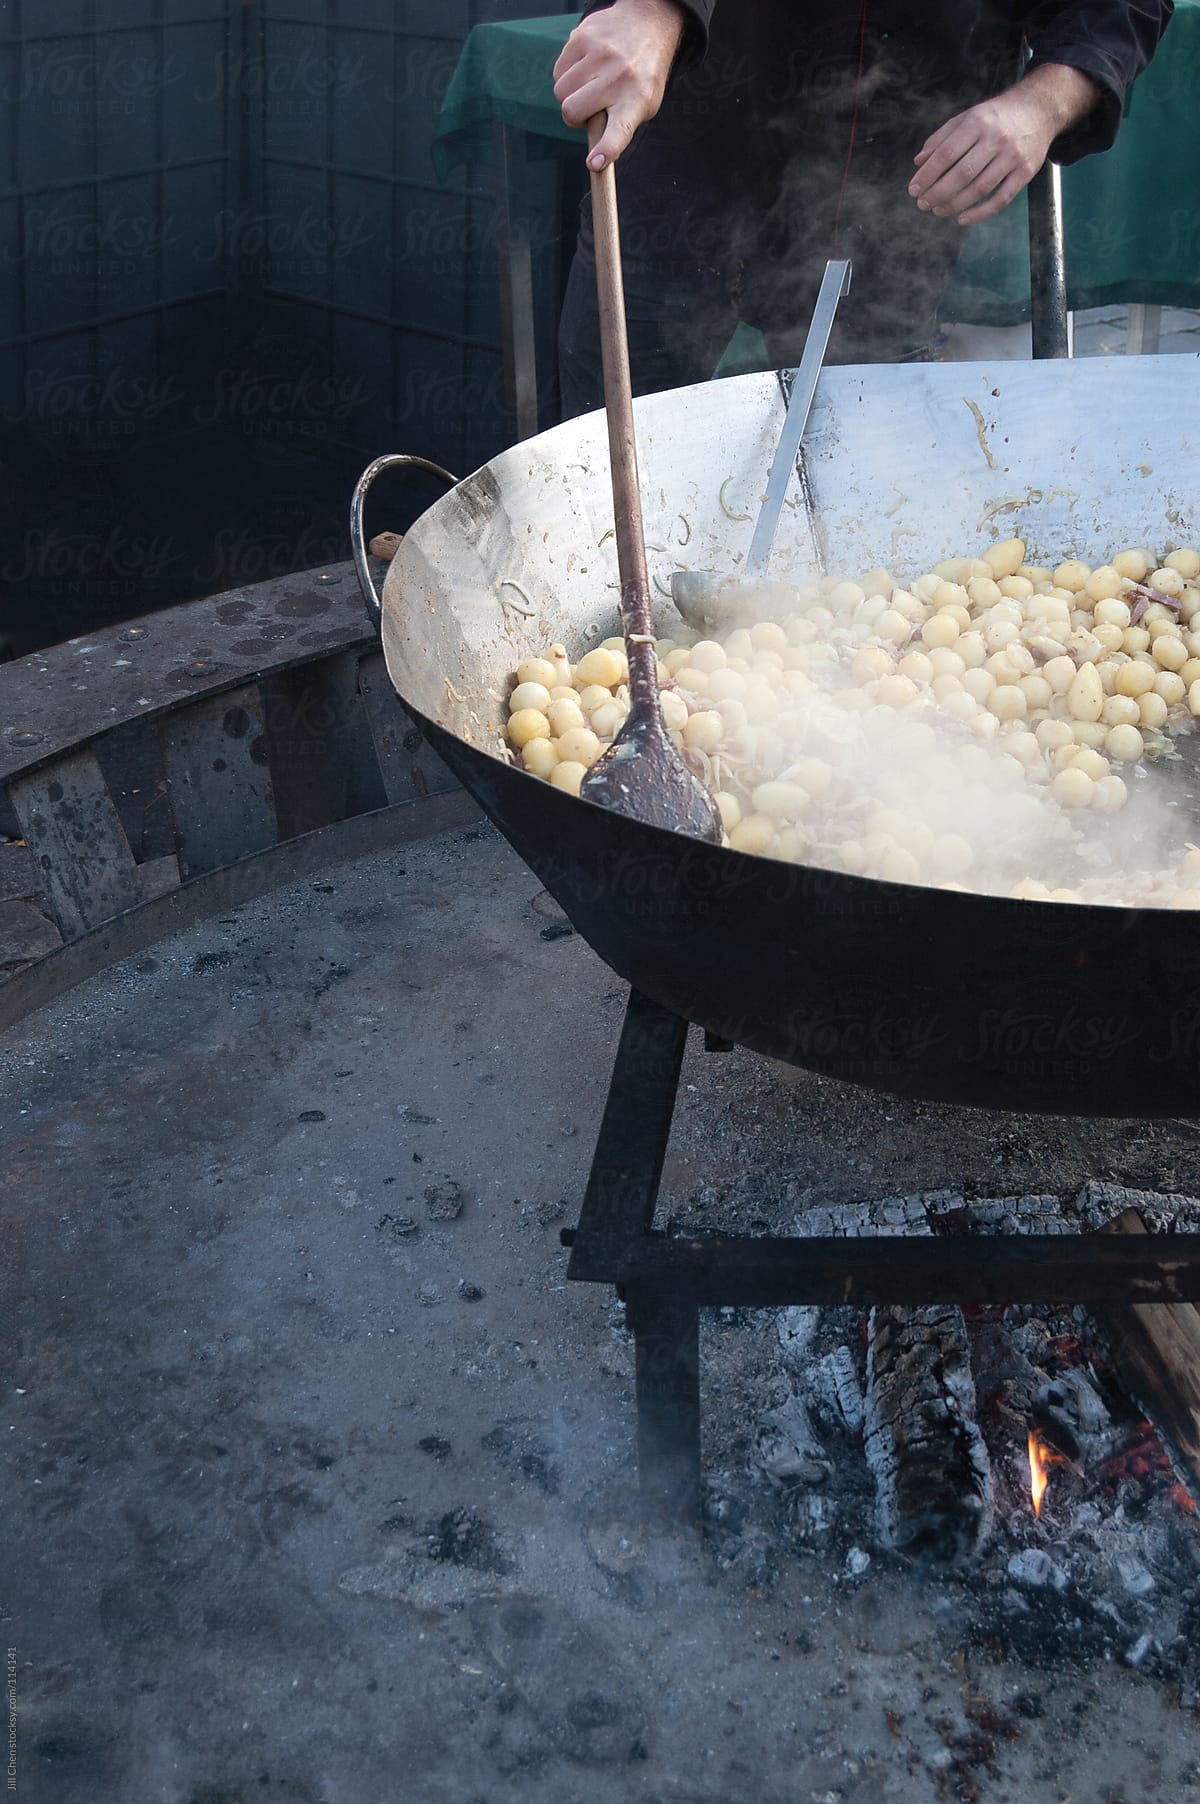 Cooking potatoes at the market